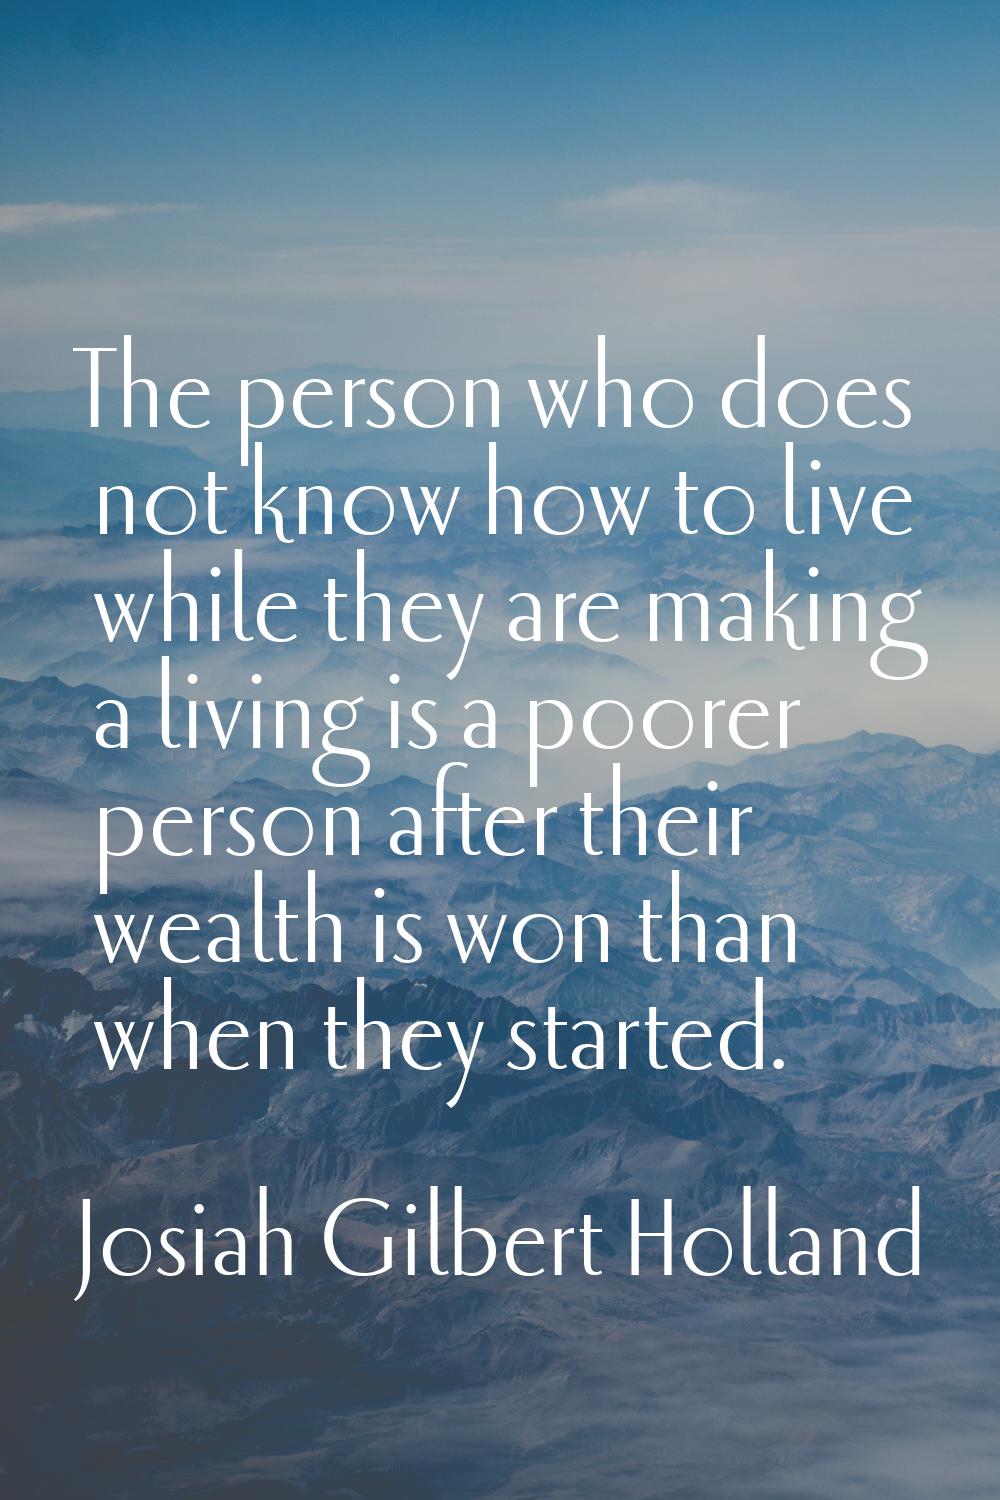 The person who does not know how to live while they are making a living is a poorer person after th